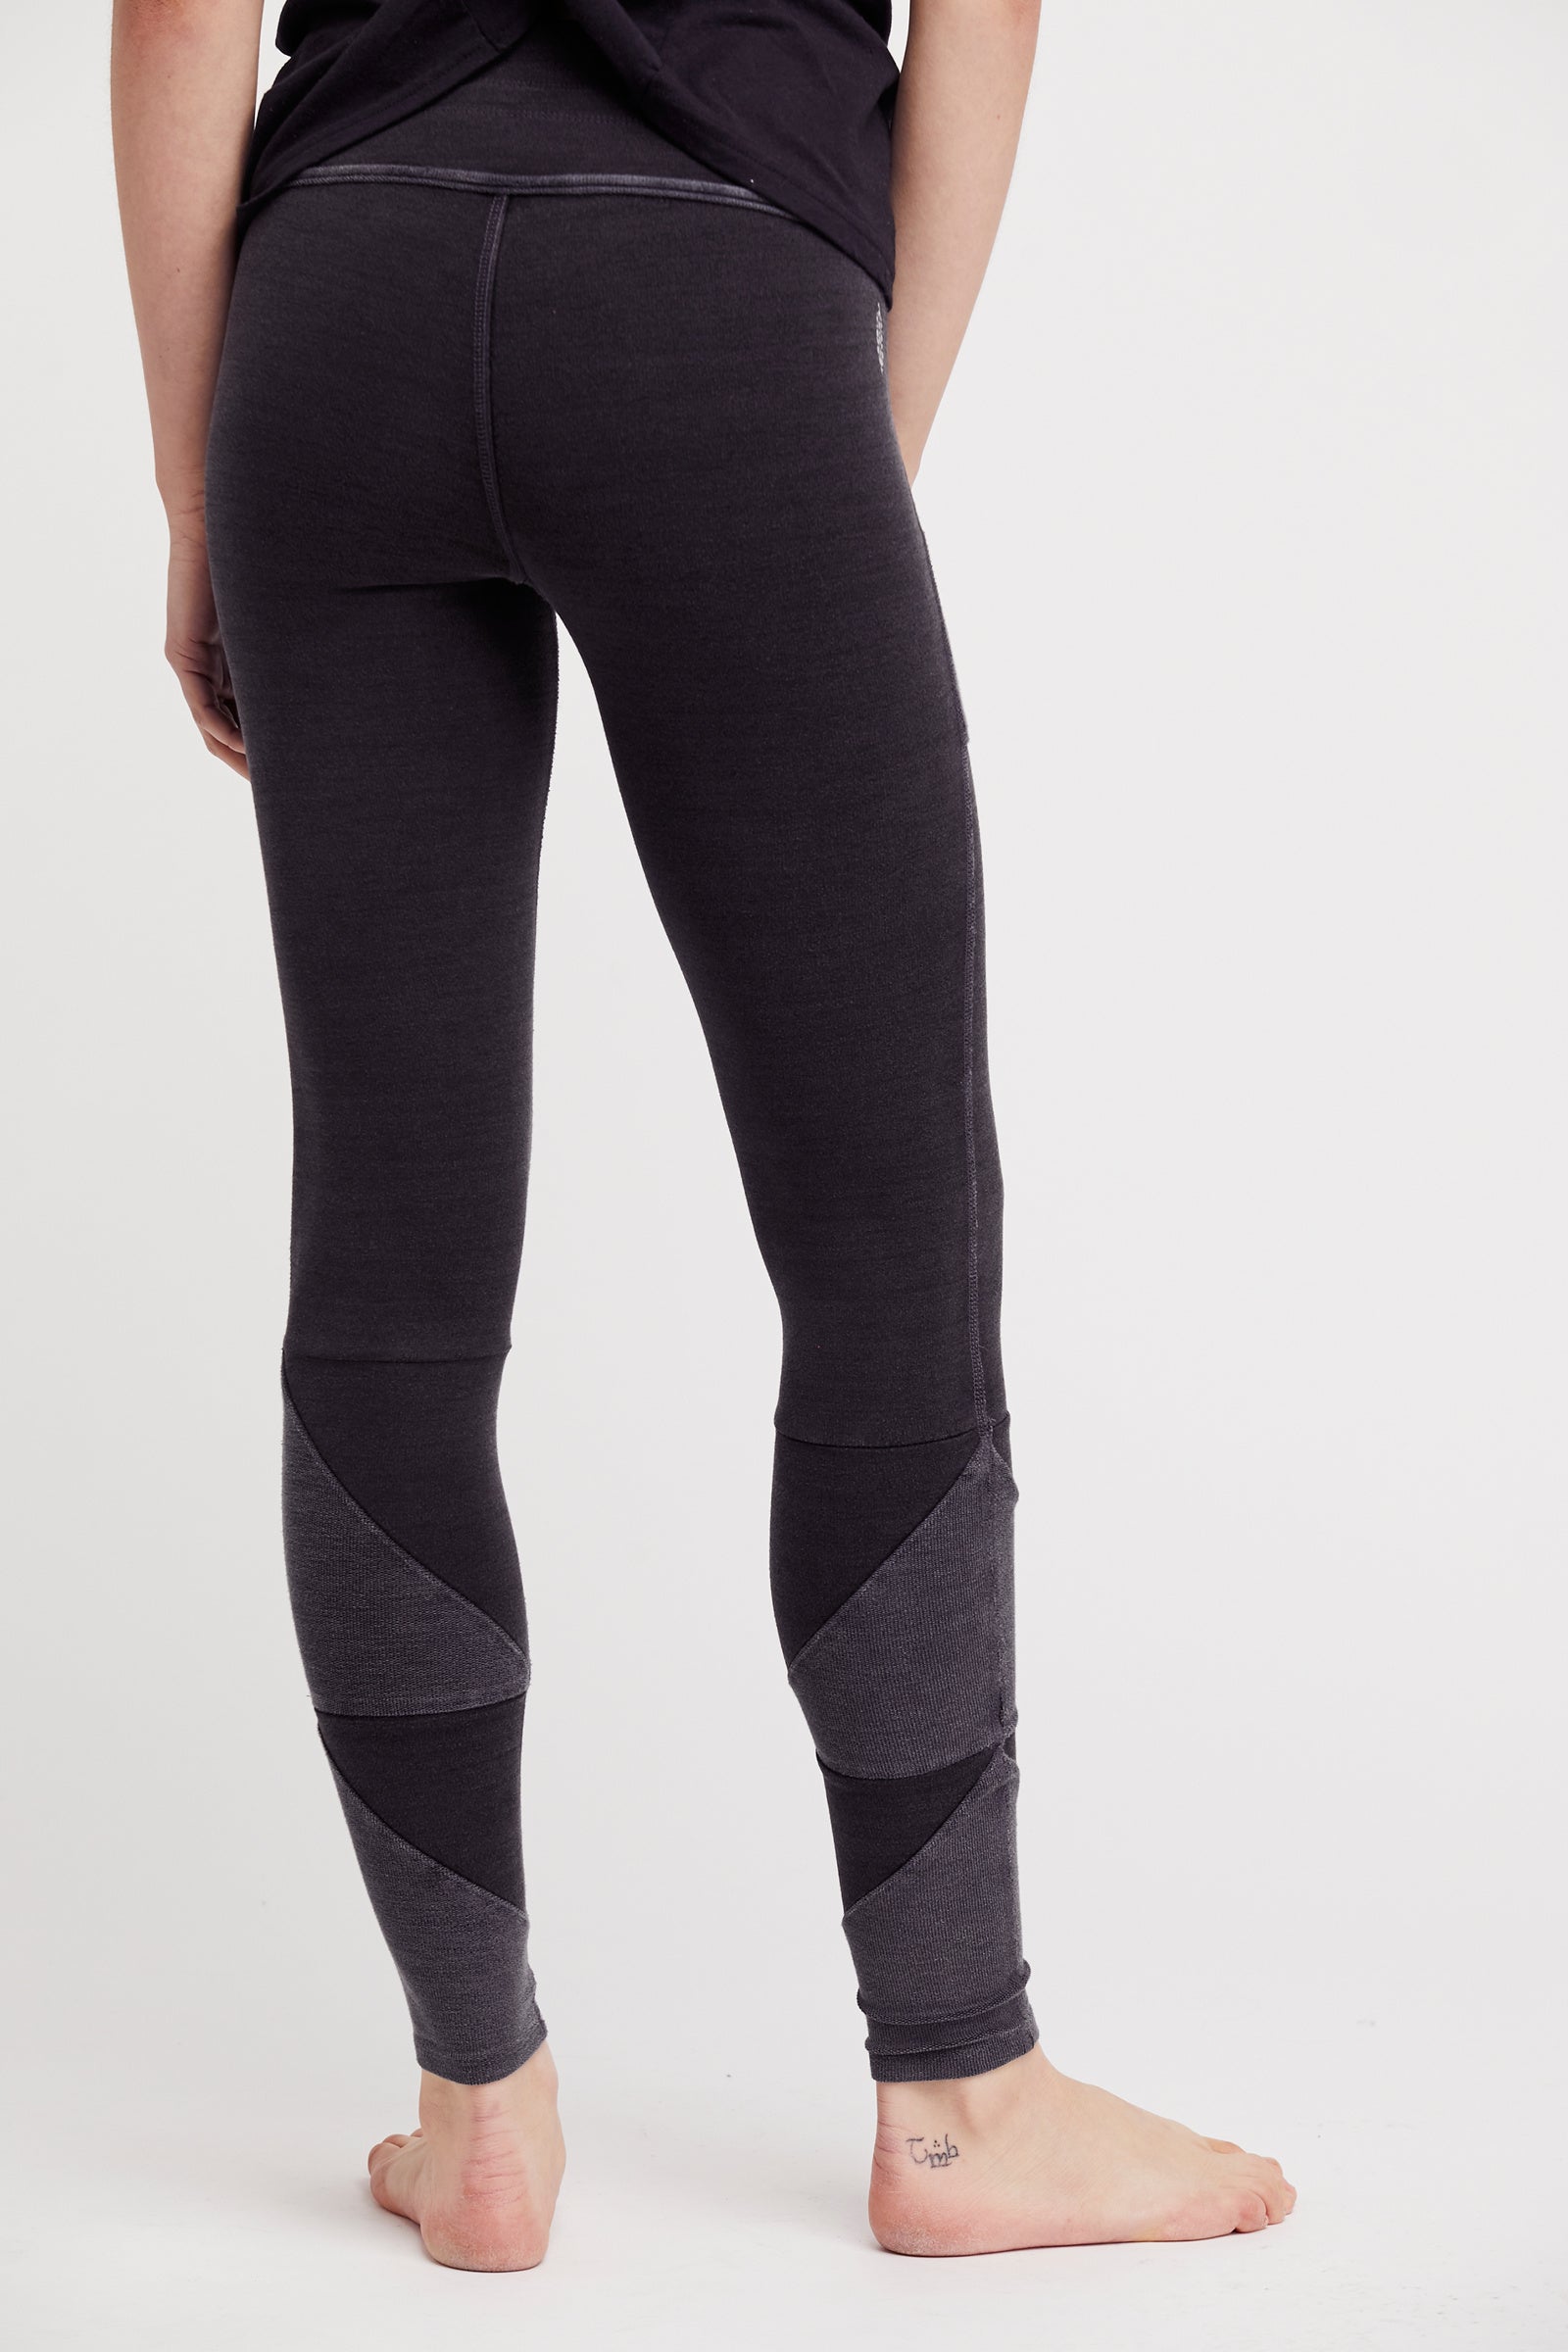 Kyoto High-Rise Ankle Legging by FP Movement at Free People, Waterlily, XS